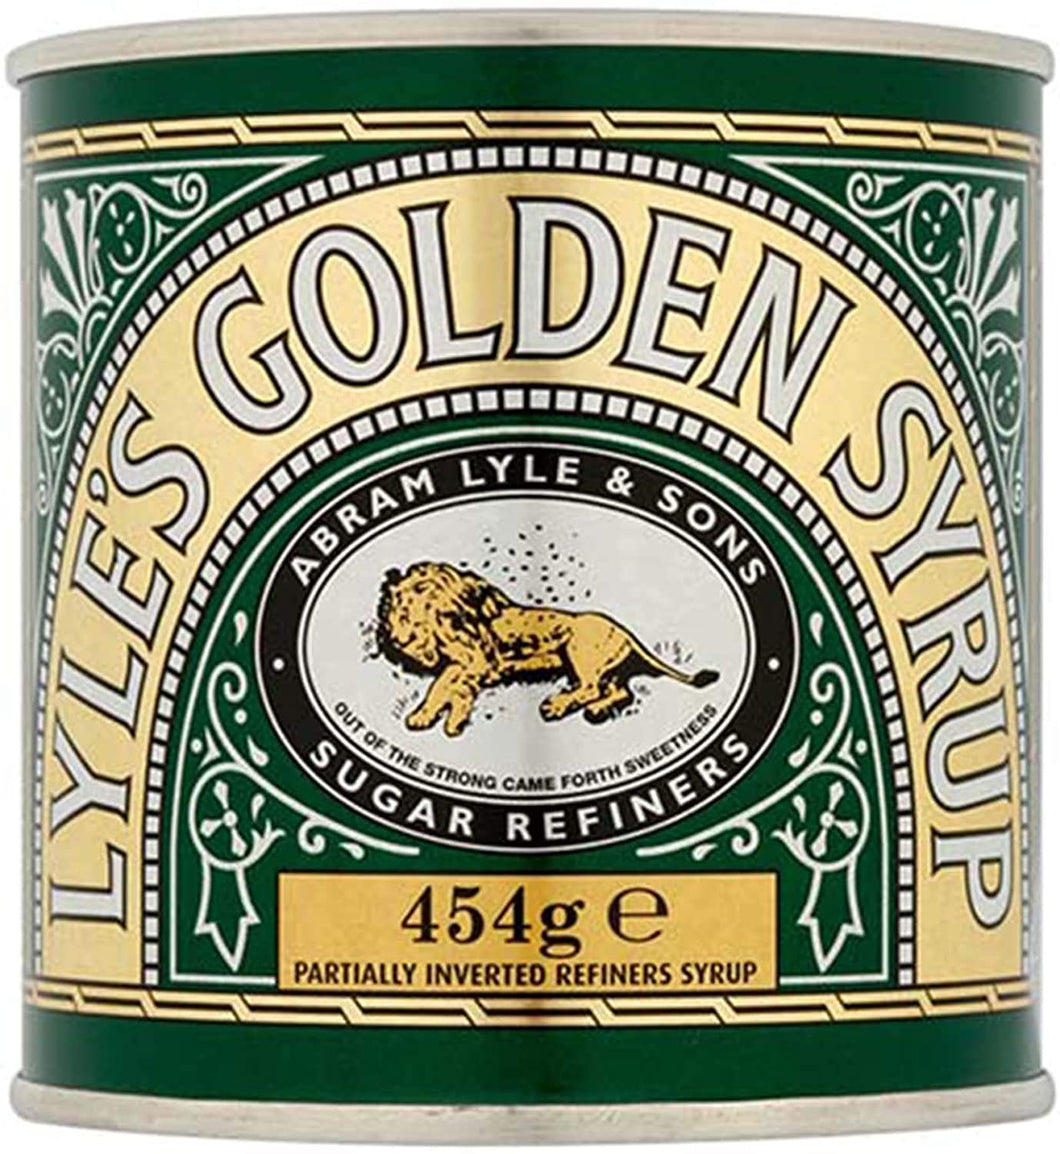 Tate & Lyle Golden Syrup 454g